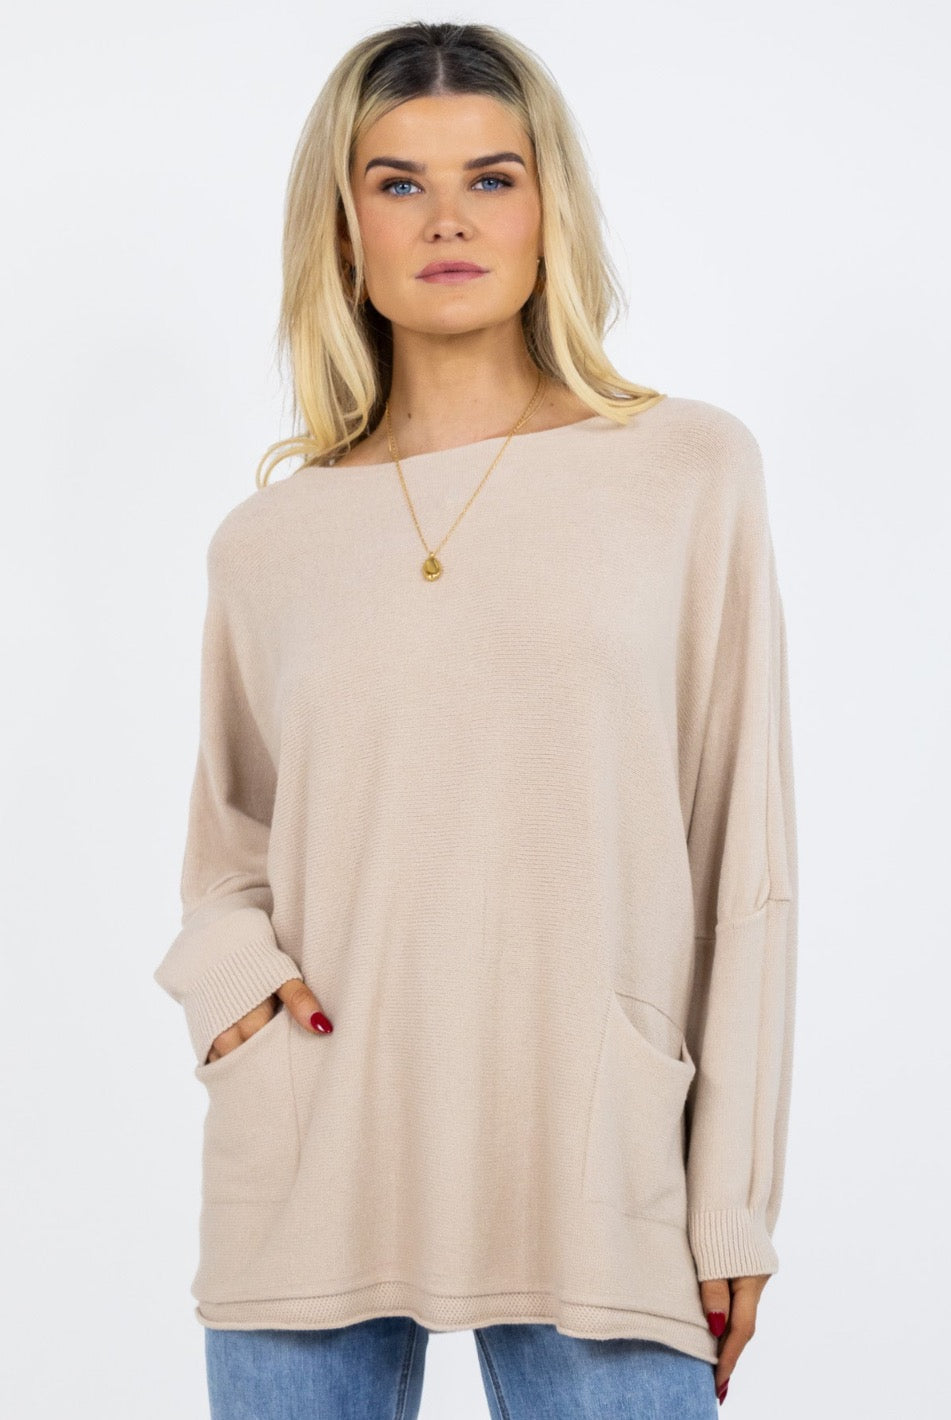 Kate & Pippa Roma Knit Jumper In Sand-Kate & Pippa